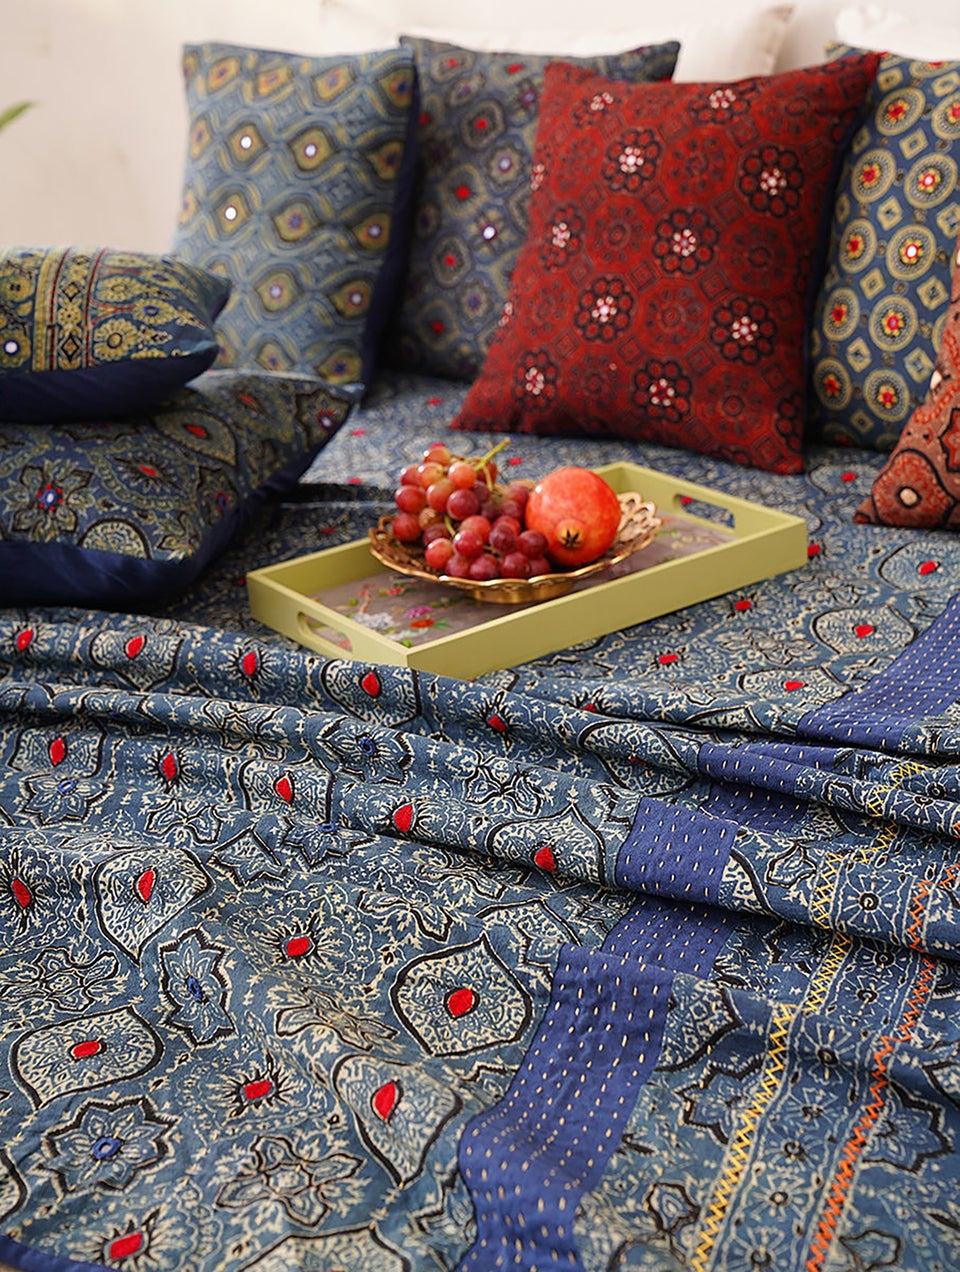 Handcrafted Gudri Bed Cover